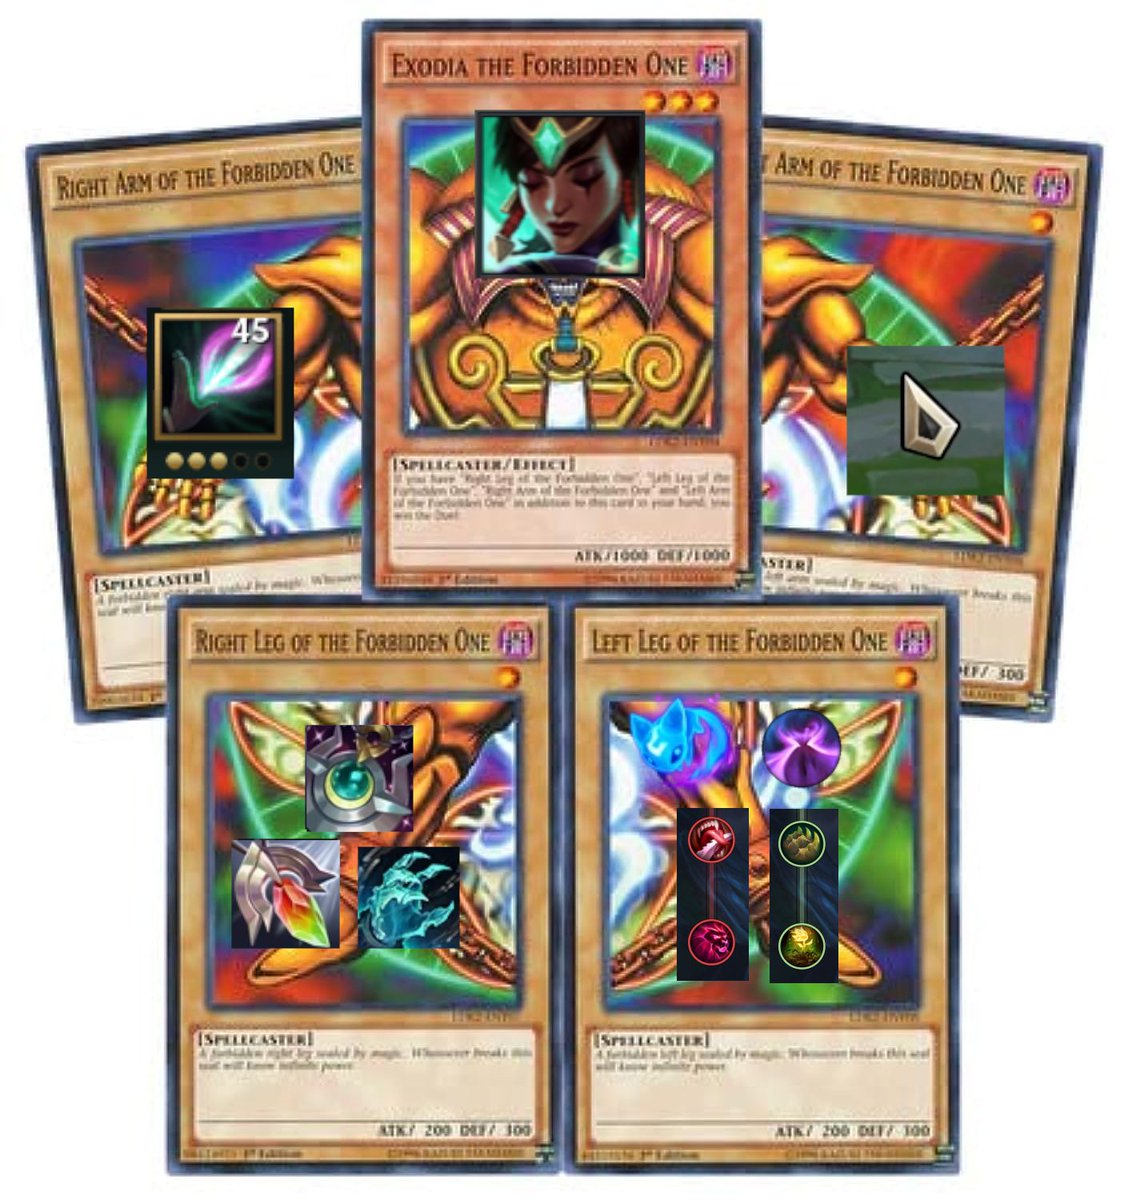 In a 1.2 million player server, at 10 players per game, your chance of drawing Exodia is 1 in 120,000. In other words, you should expect to see Exodia 0.00083% of the time. In the event that you are to draw The Forbidden One, the game is automatically won.